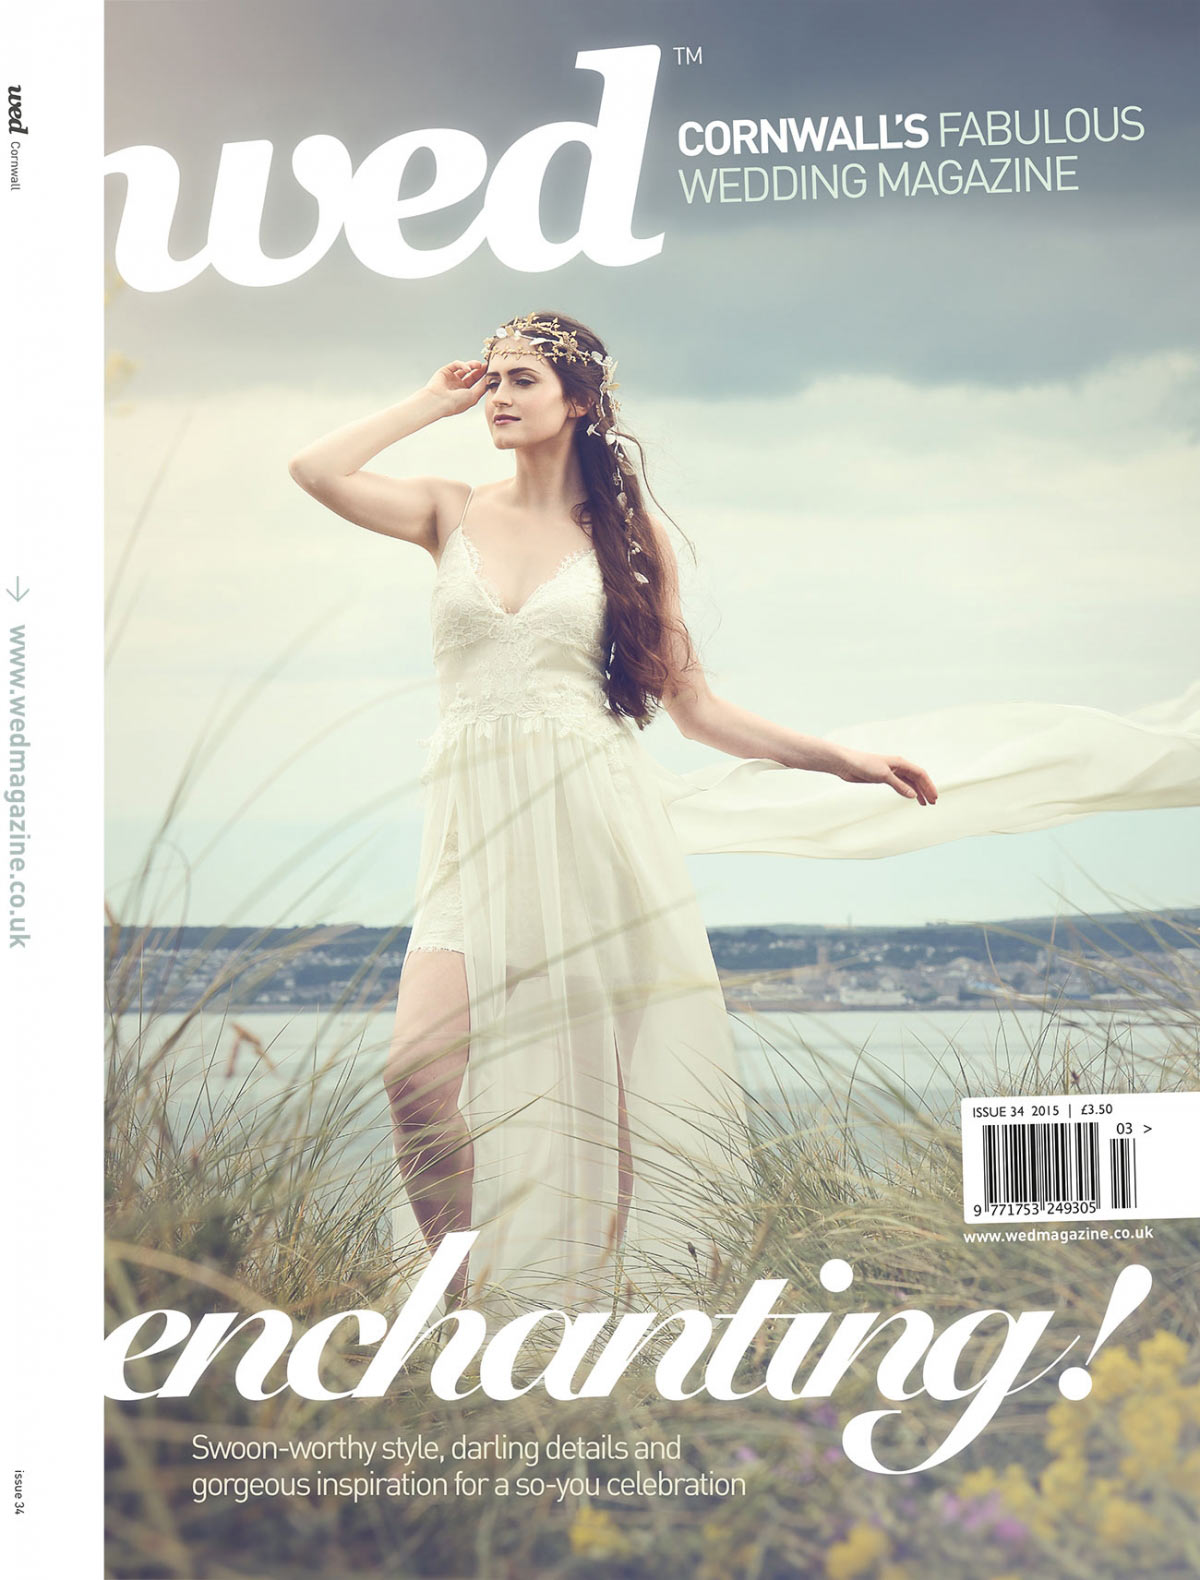 New Cornwall Wed out now!